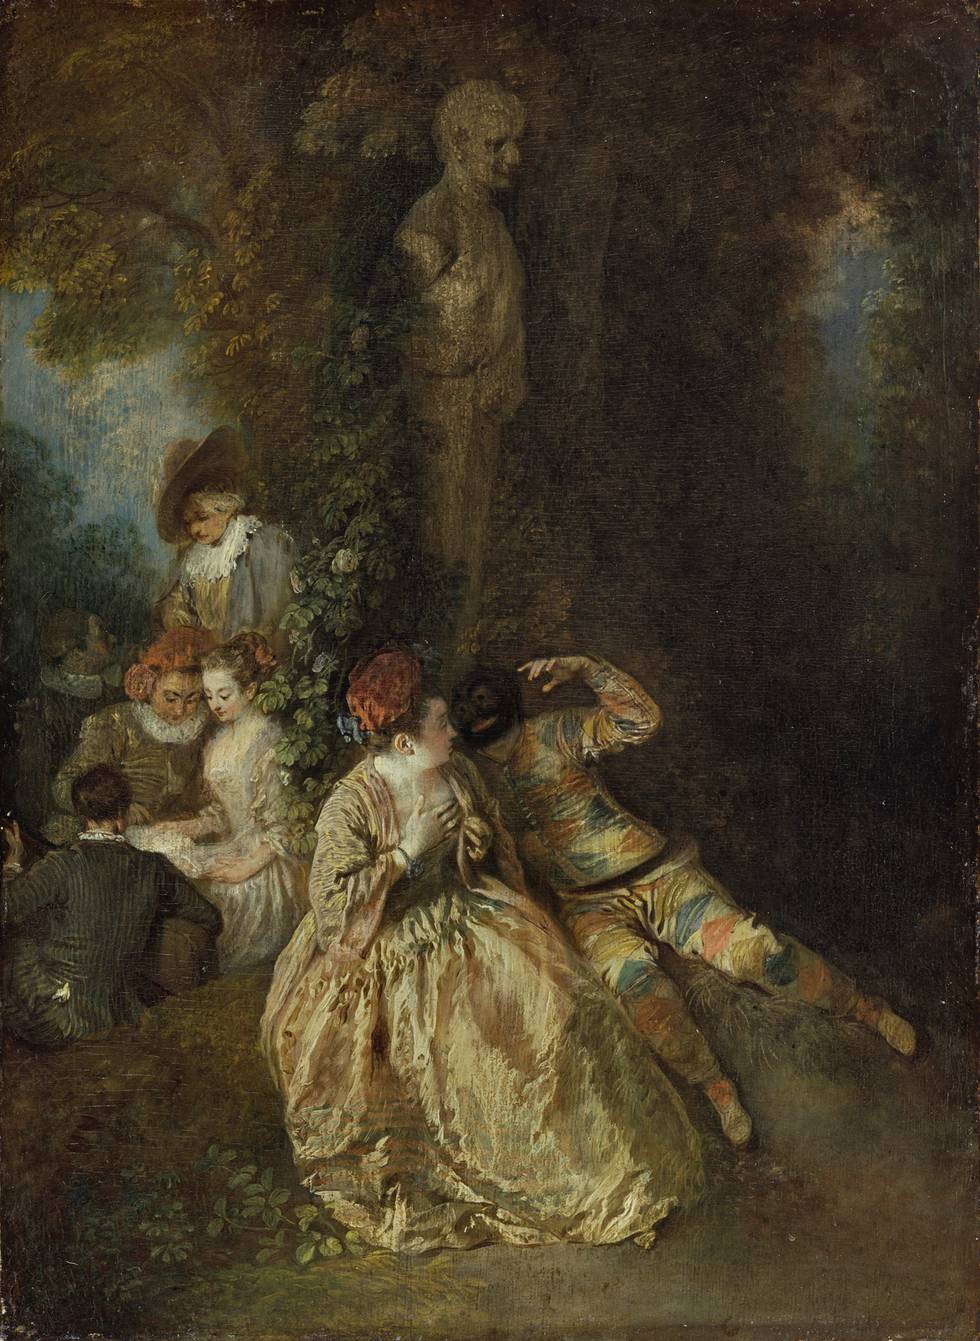 A painting of a group of figures in a wooded landscape